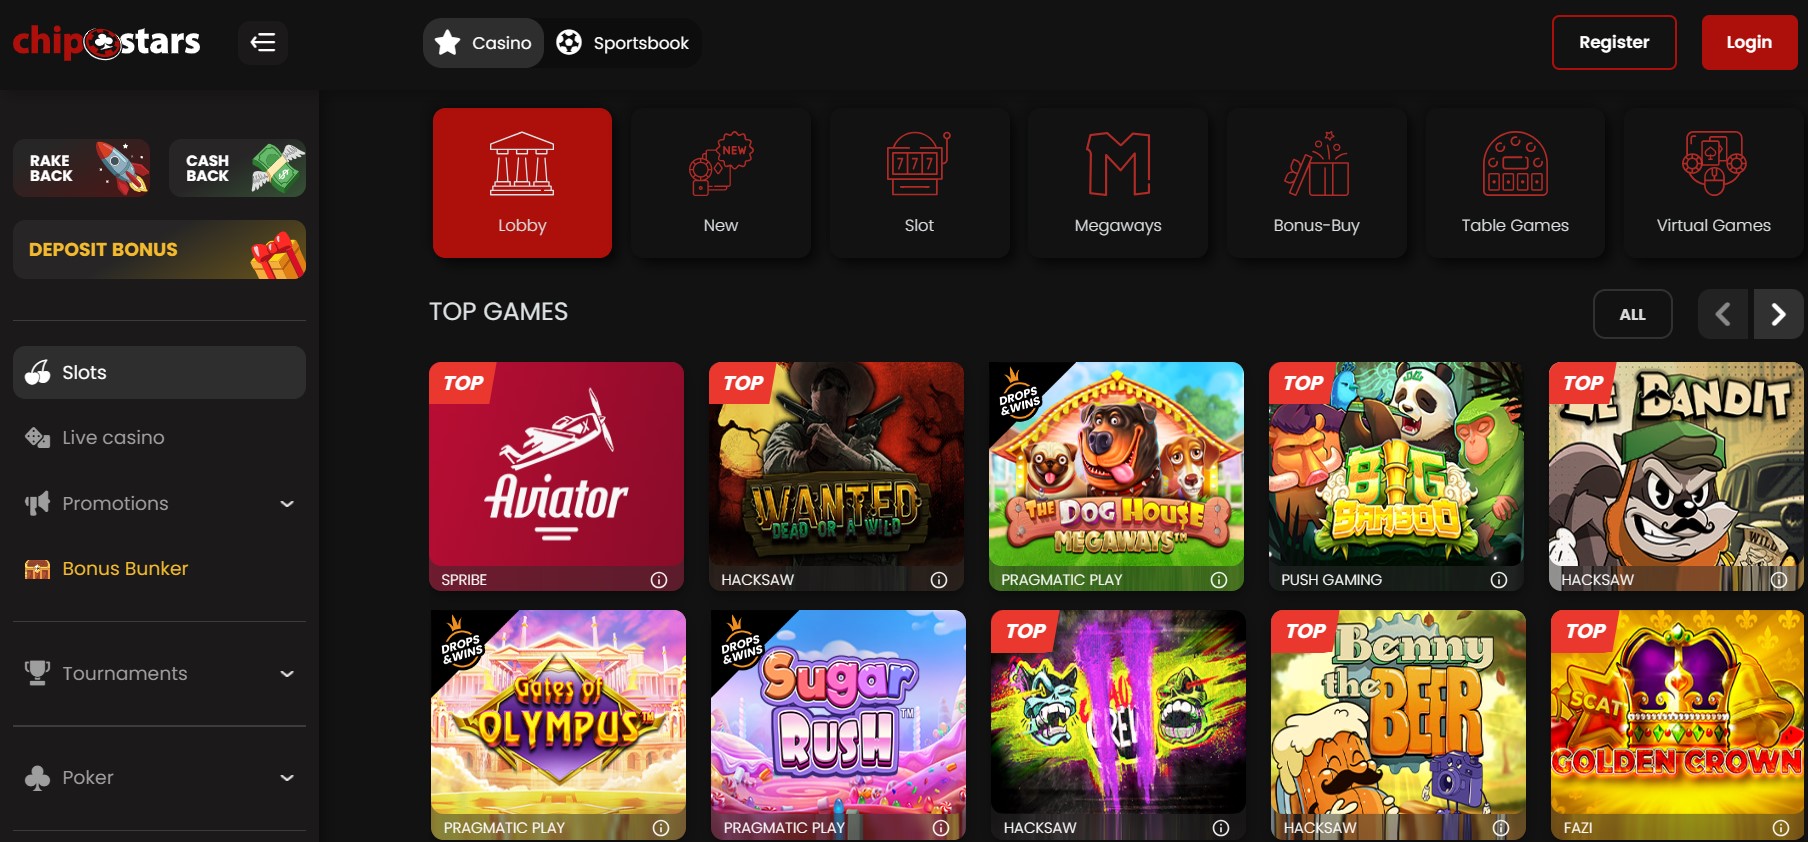 Chipstars Casino Games Review